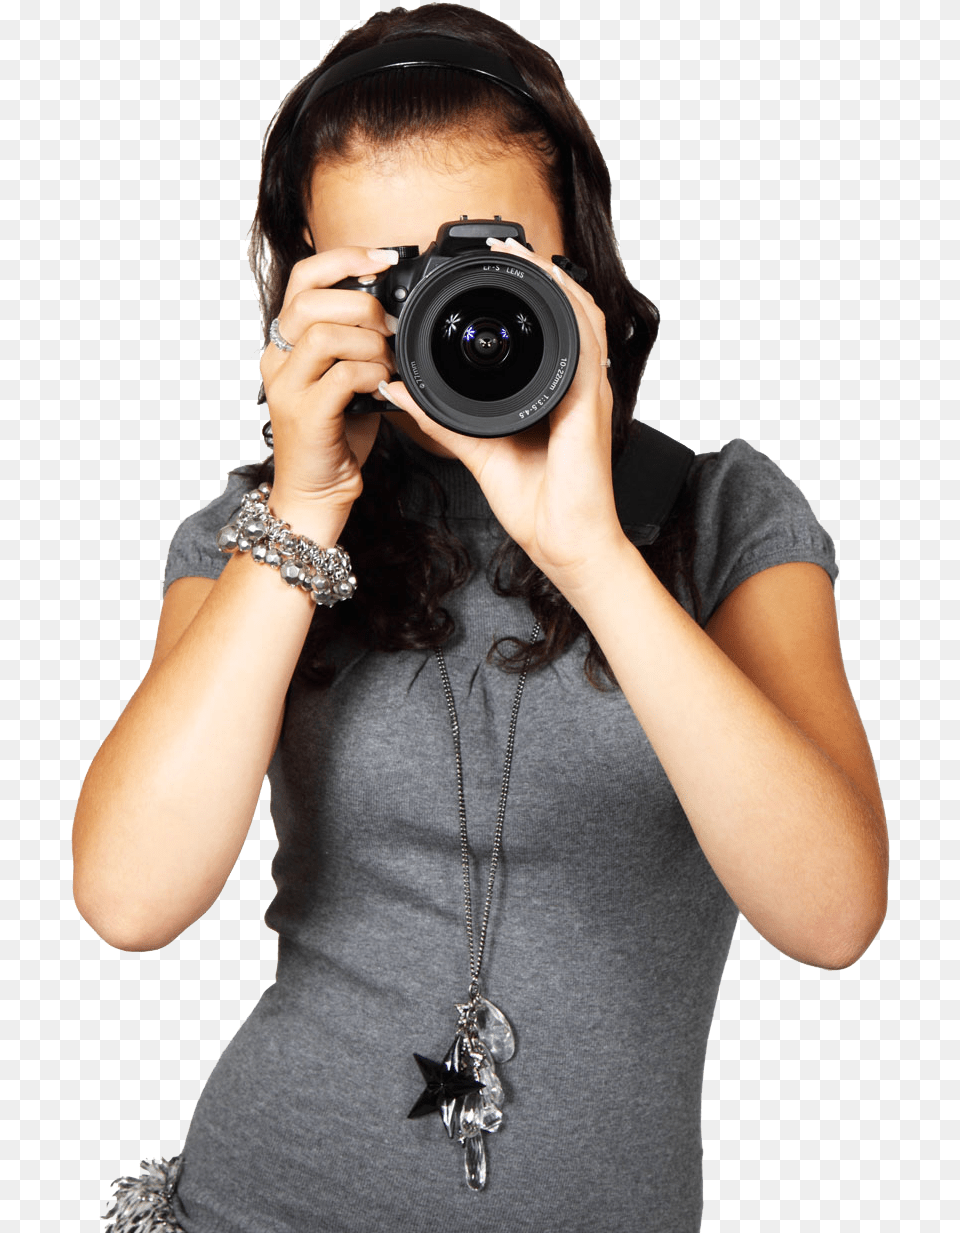 File For Designing Projects People Looking Through Camera, Woman, Adult, Electronics, Photography Free Png Download